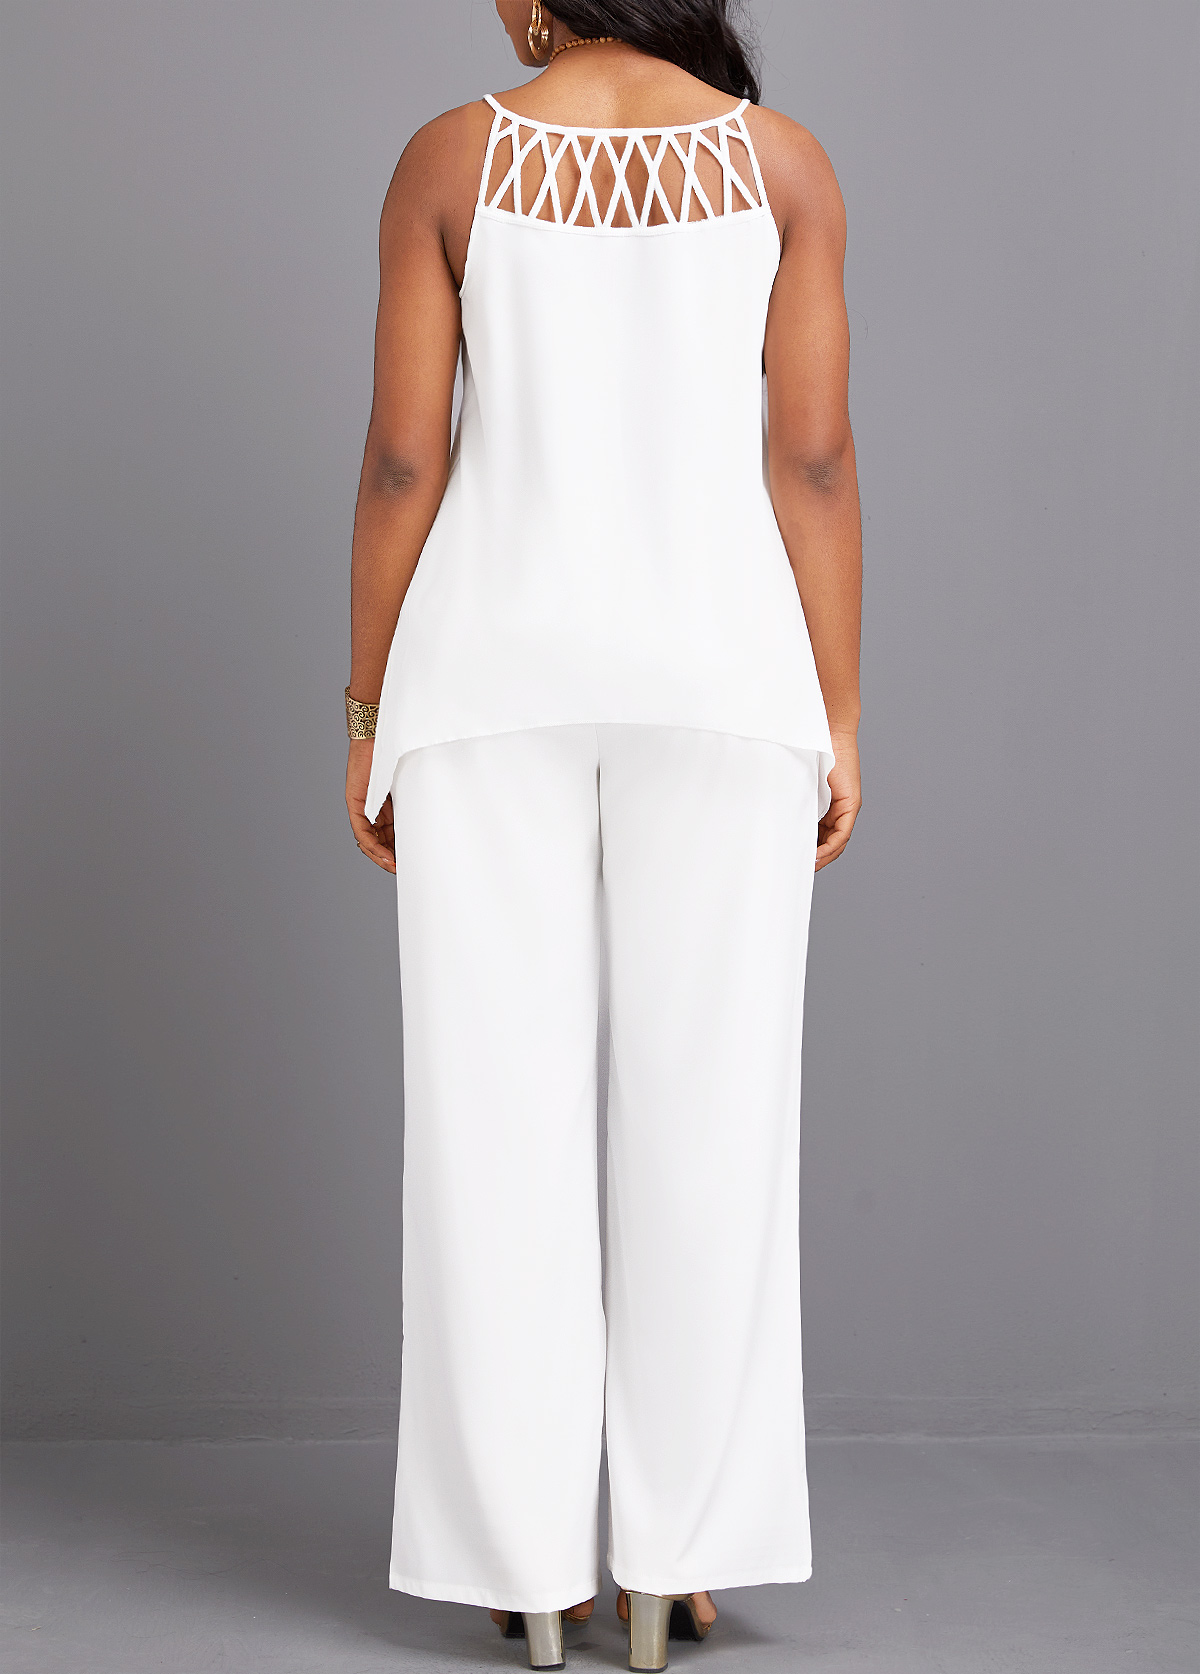 White Cage Neck Long Sleeveless Top and Pants